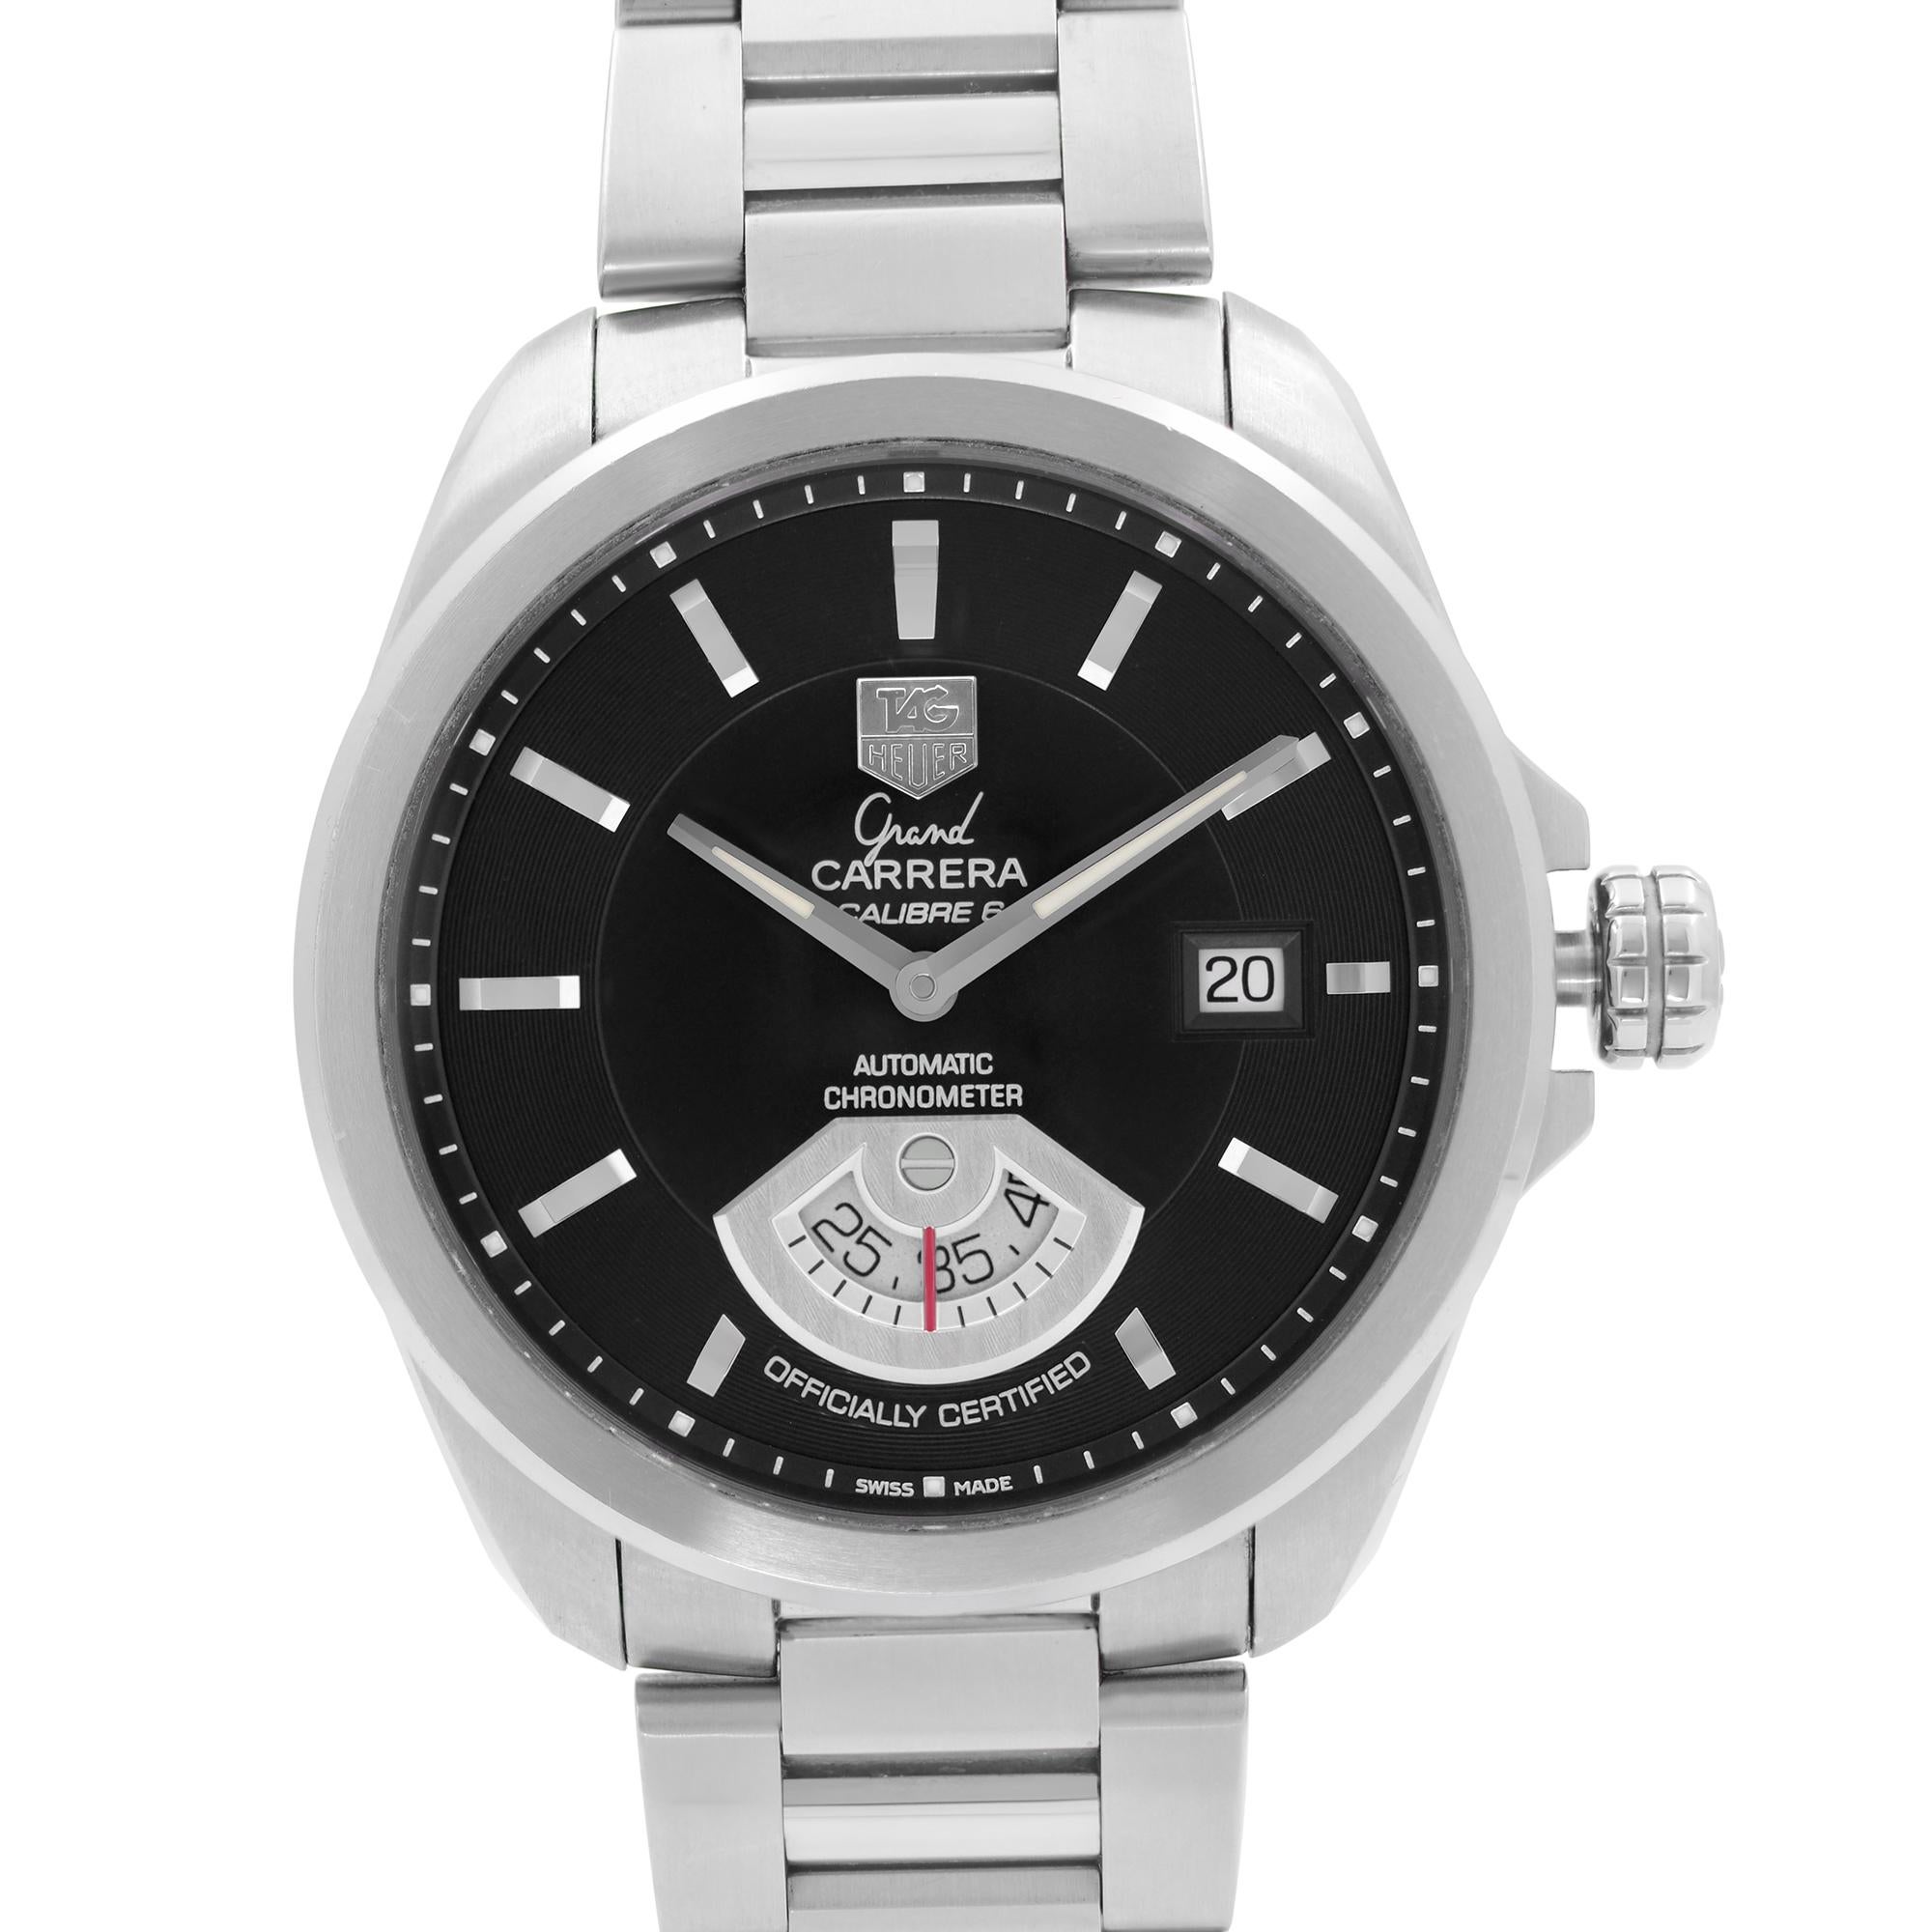 Pre Owned TAG Heuer Grand Carrera Steel Black Dial Automatic Men's Watch WAV511A.BA0900. This Beautiful Timepiece Features: Stainless Steel Case & Bracelet, Fixed Smooth Stainless Steel Bezel, Black Dial with Luminous Silver-Tone Hands, and Index